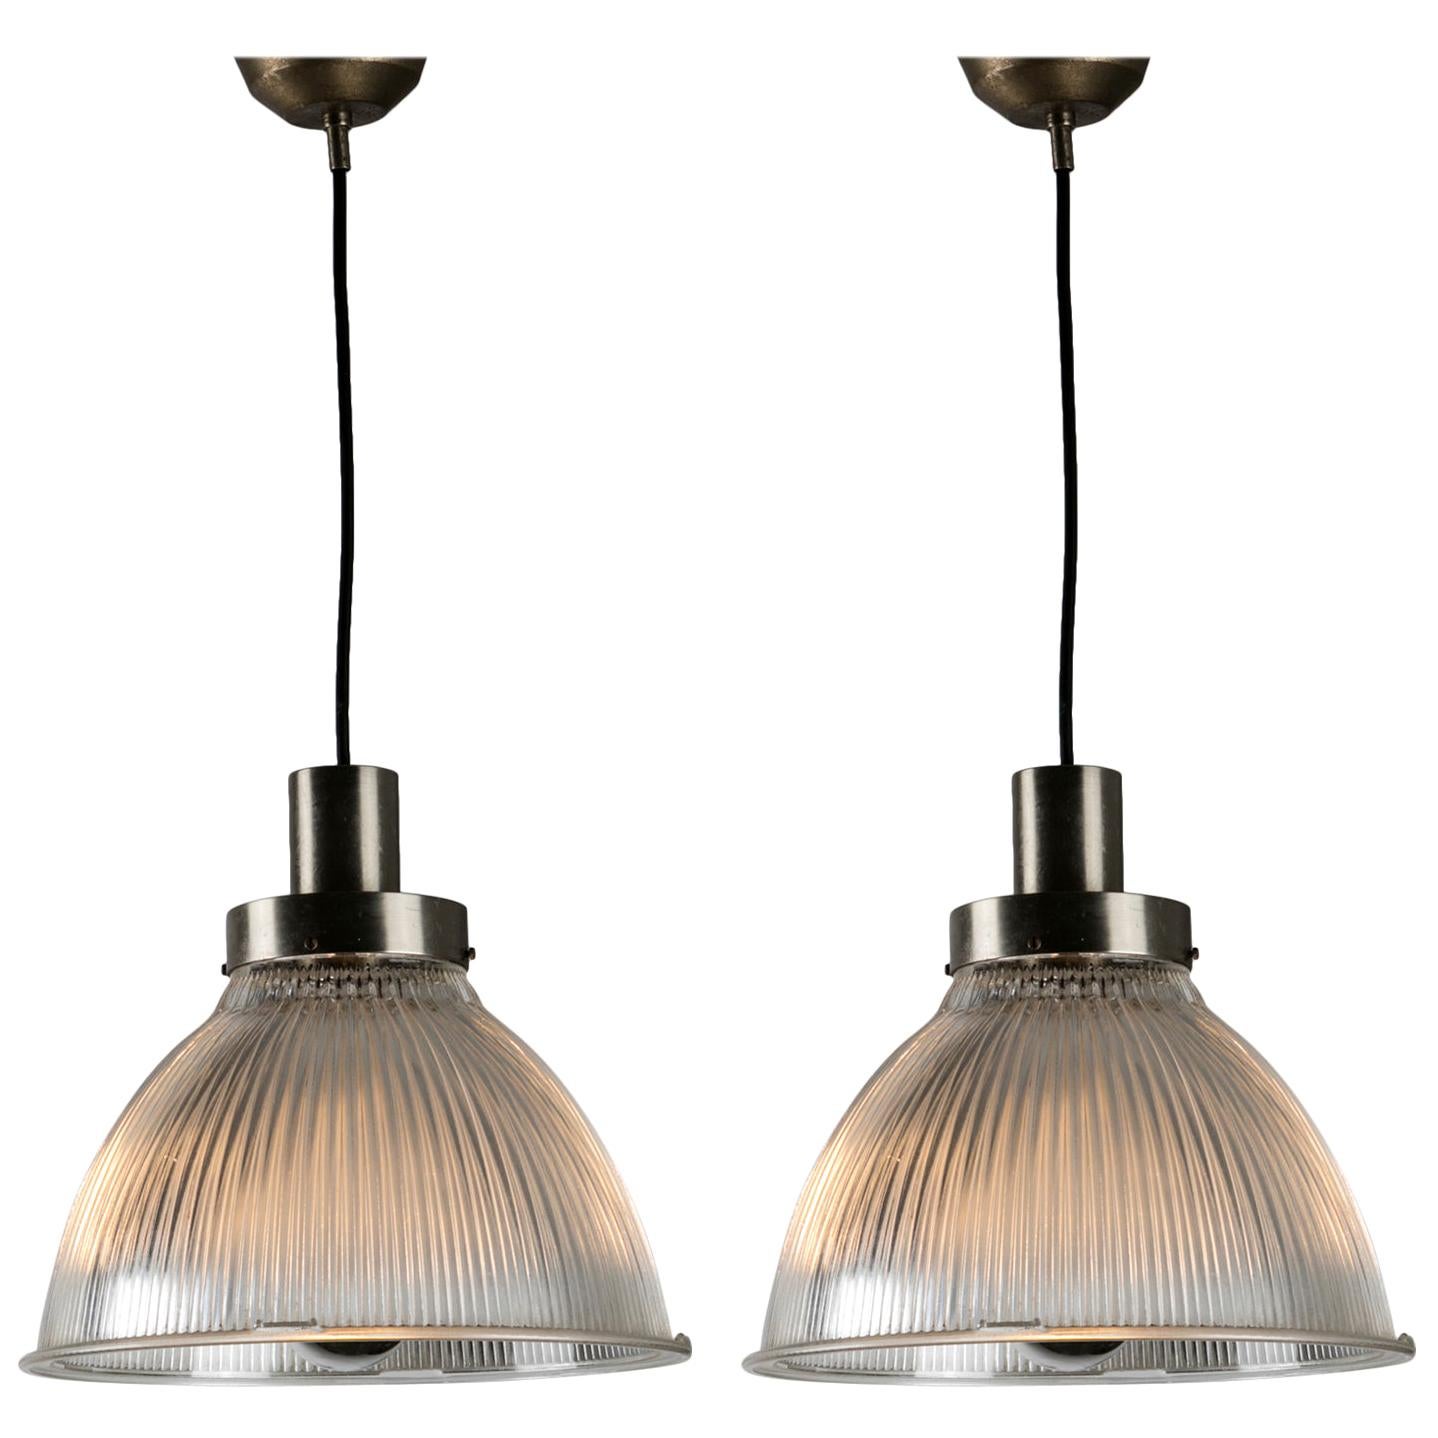 Set of Two Pendant Lamps in the style of B.B.P.R. for Artemide, Italy, 1950s For Sale